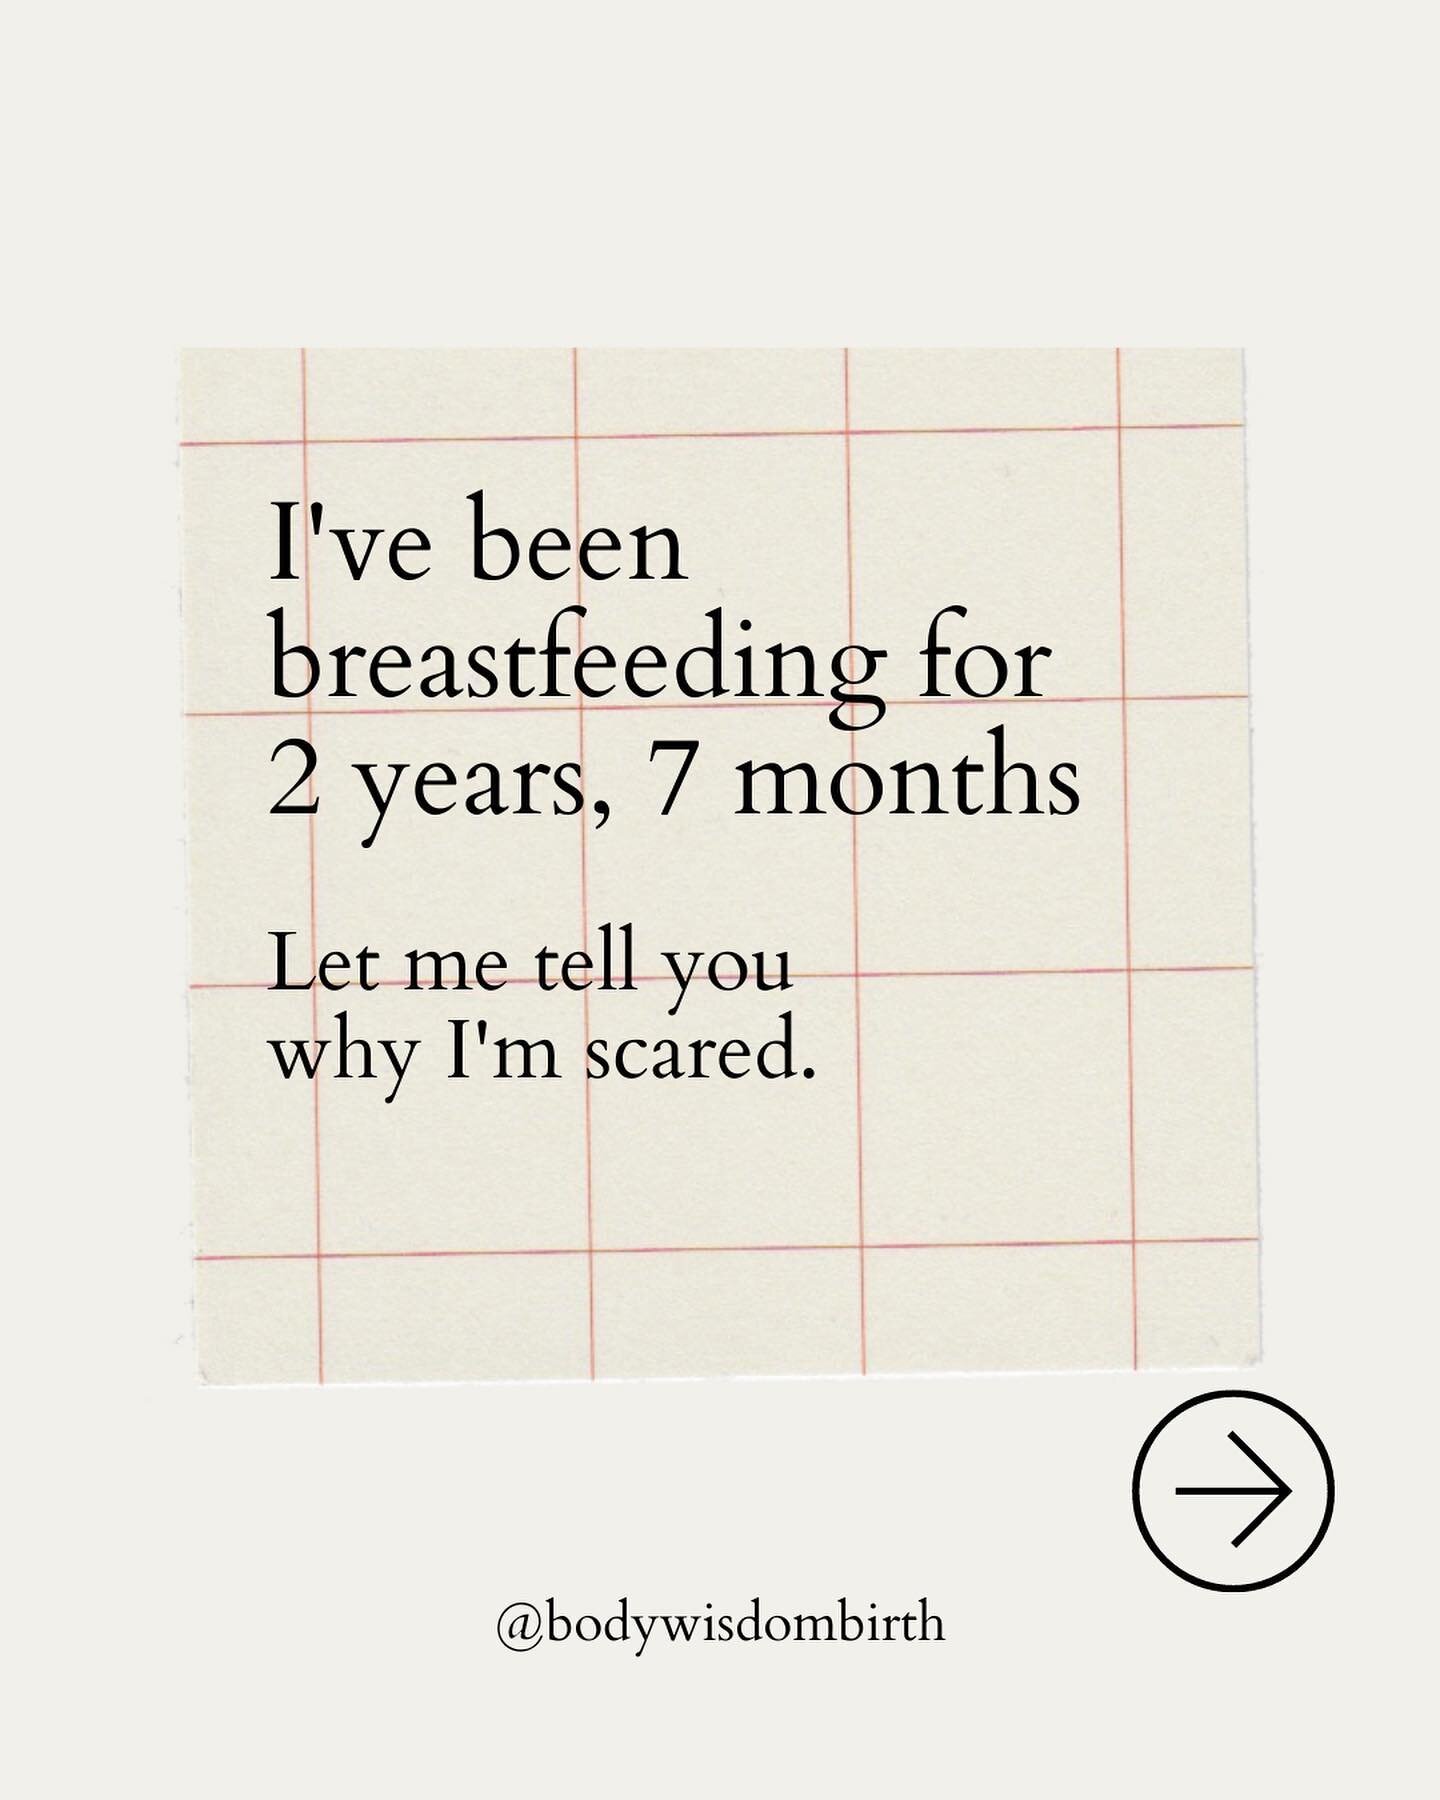 How was your weaning journey?

I&rsquo;m in no rush but looking to lay the foundations for a slow and gentle transition for both of us into a life without the boob.

I&rsquo;m already feeling the swirl of sadness and anxiety about what the heck we do